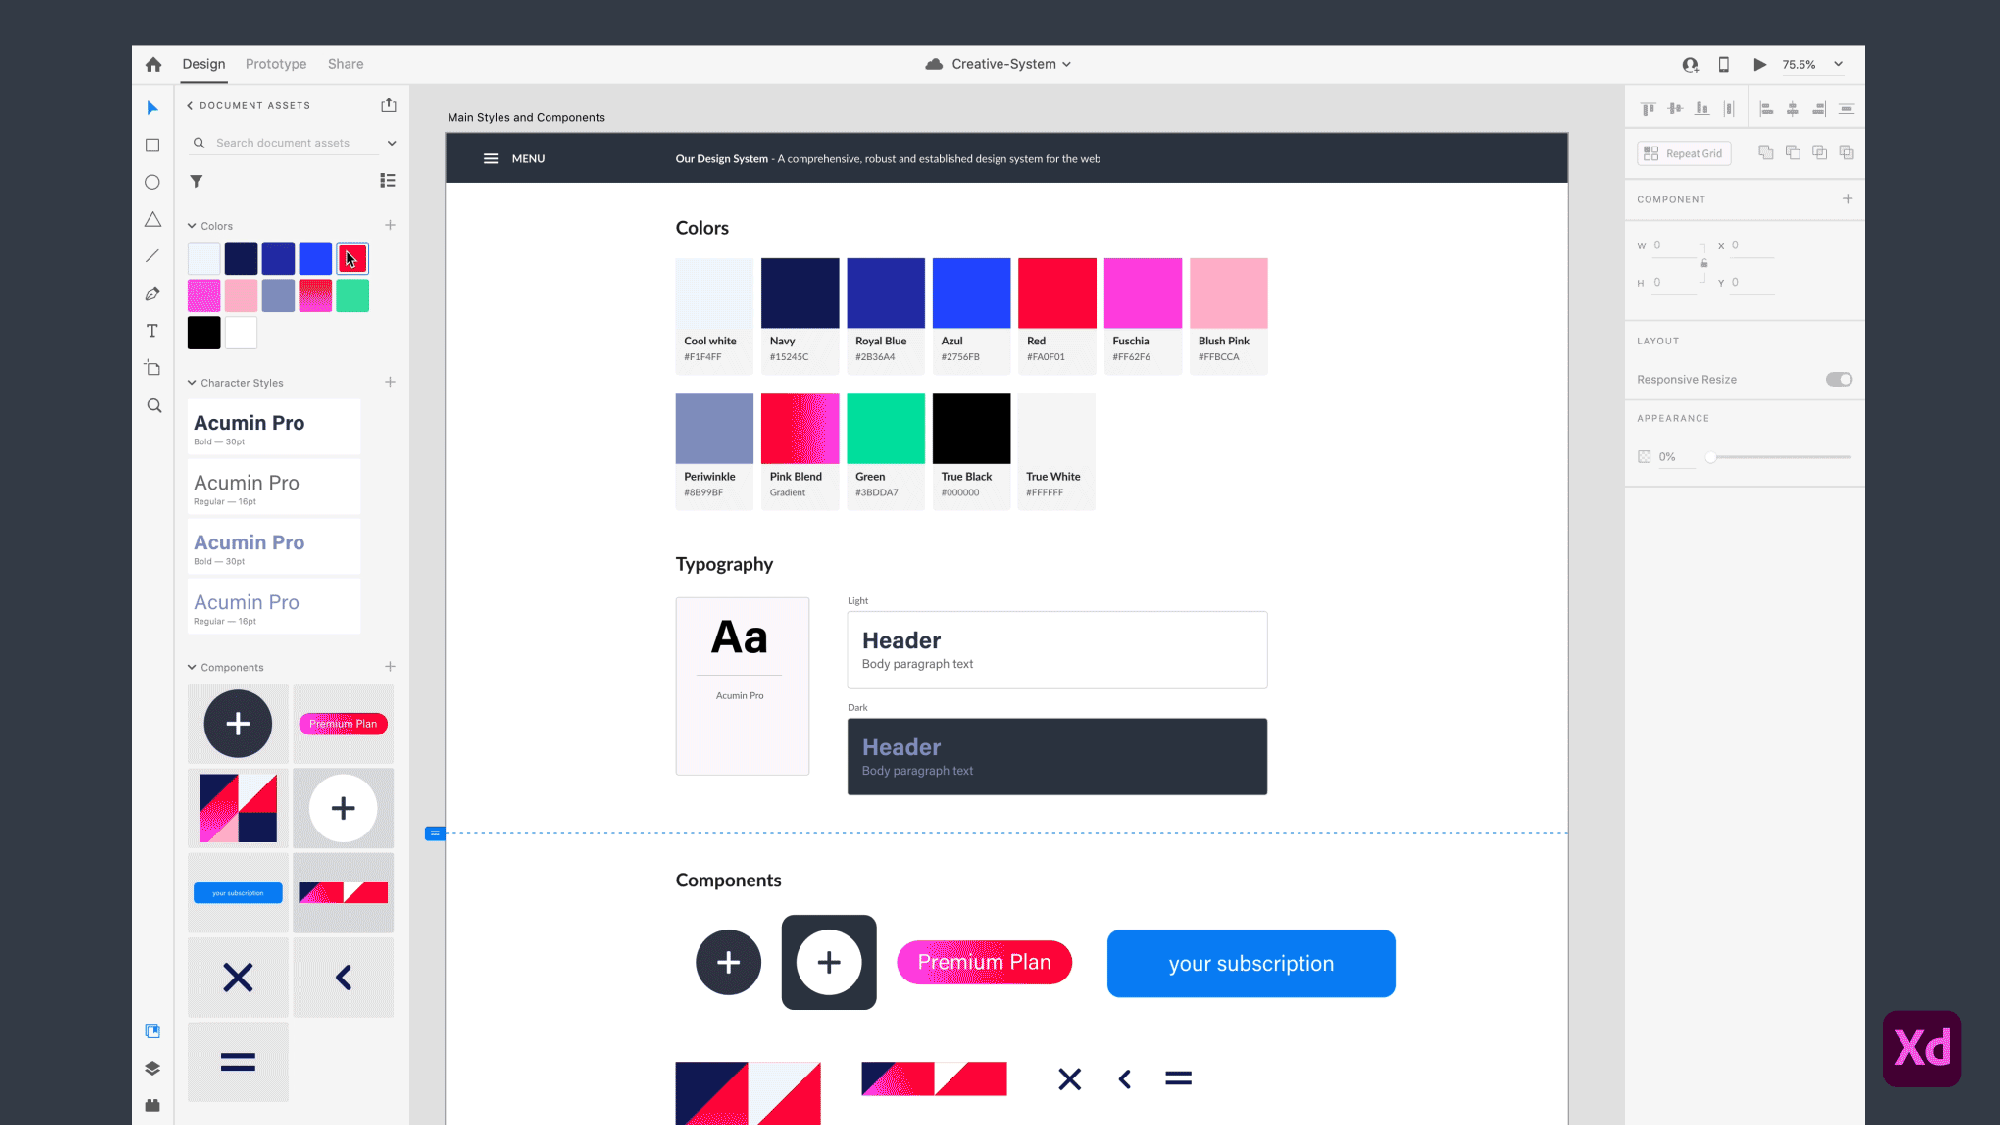 A GIF showing the Edit action in Adobe XD: After editing a color from red to purple an update message appears and "Update Now" is clicked.